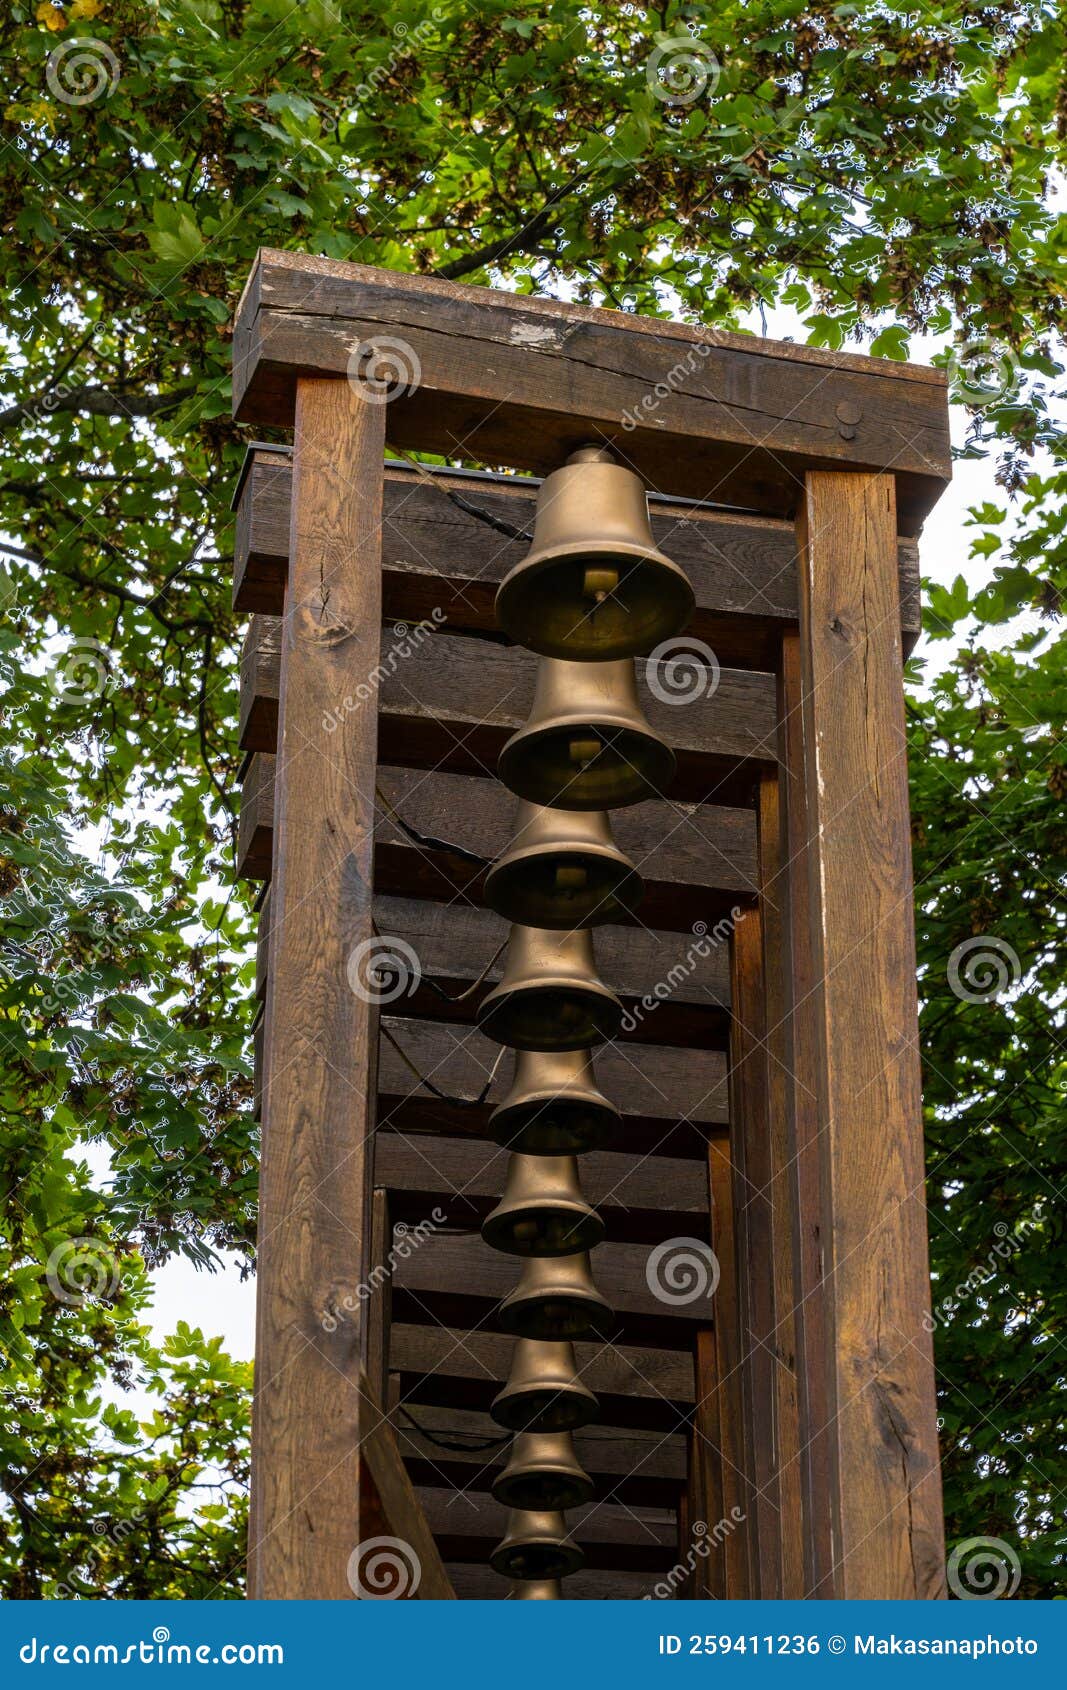 wooden rack with many brass bells and trees behind